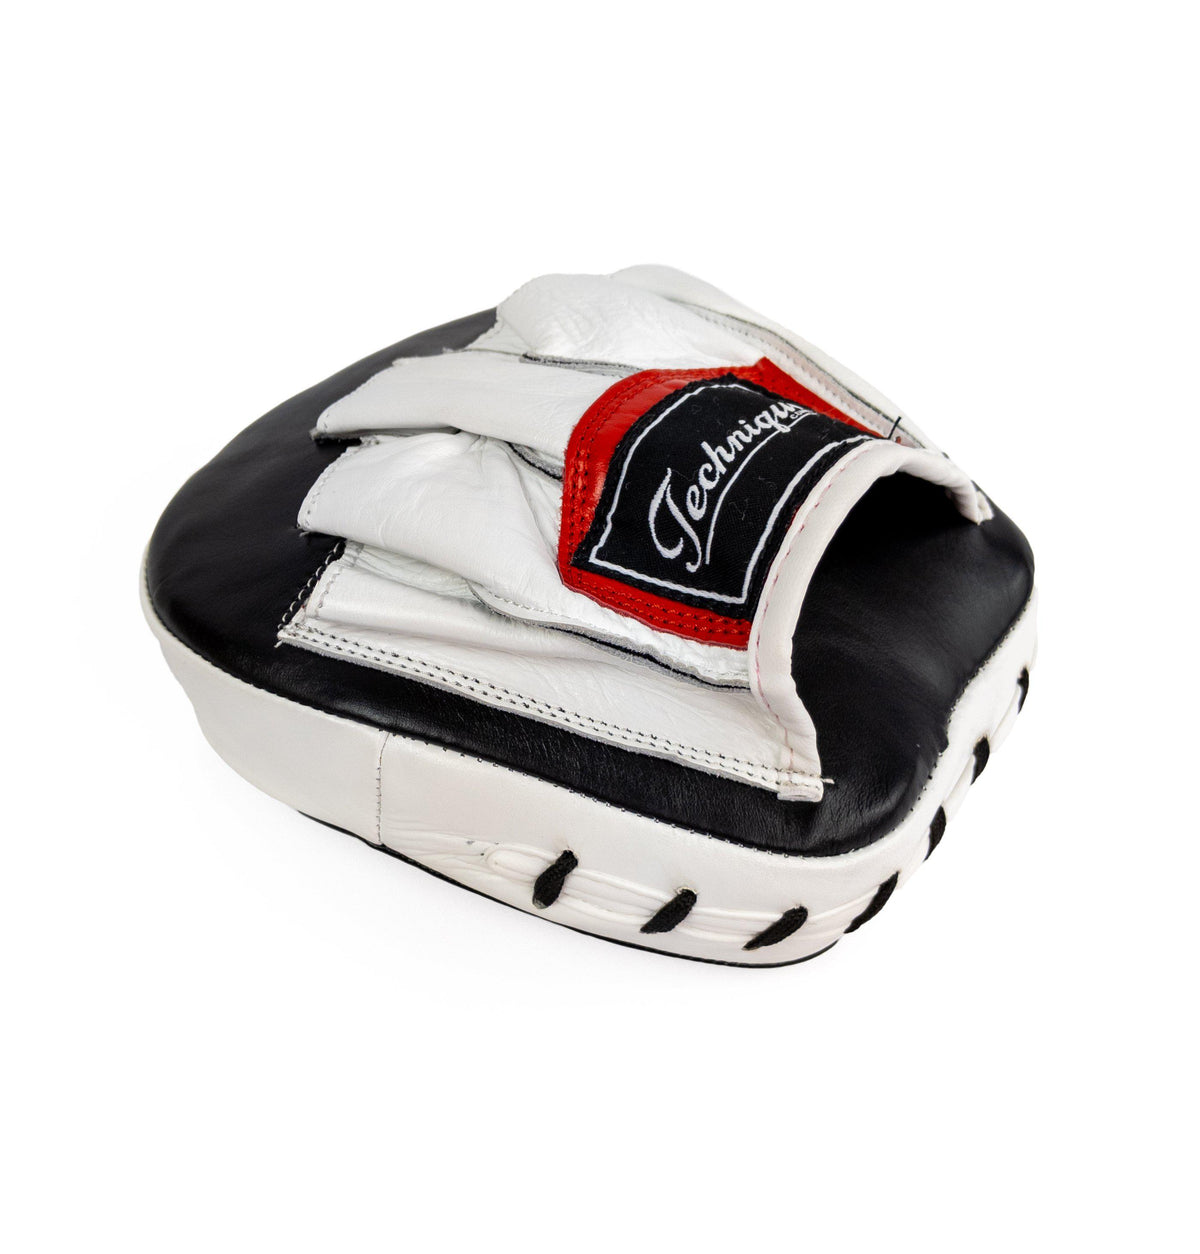 Focus Mitts - White &amp; Red-FloTec Collection-Techniques